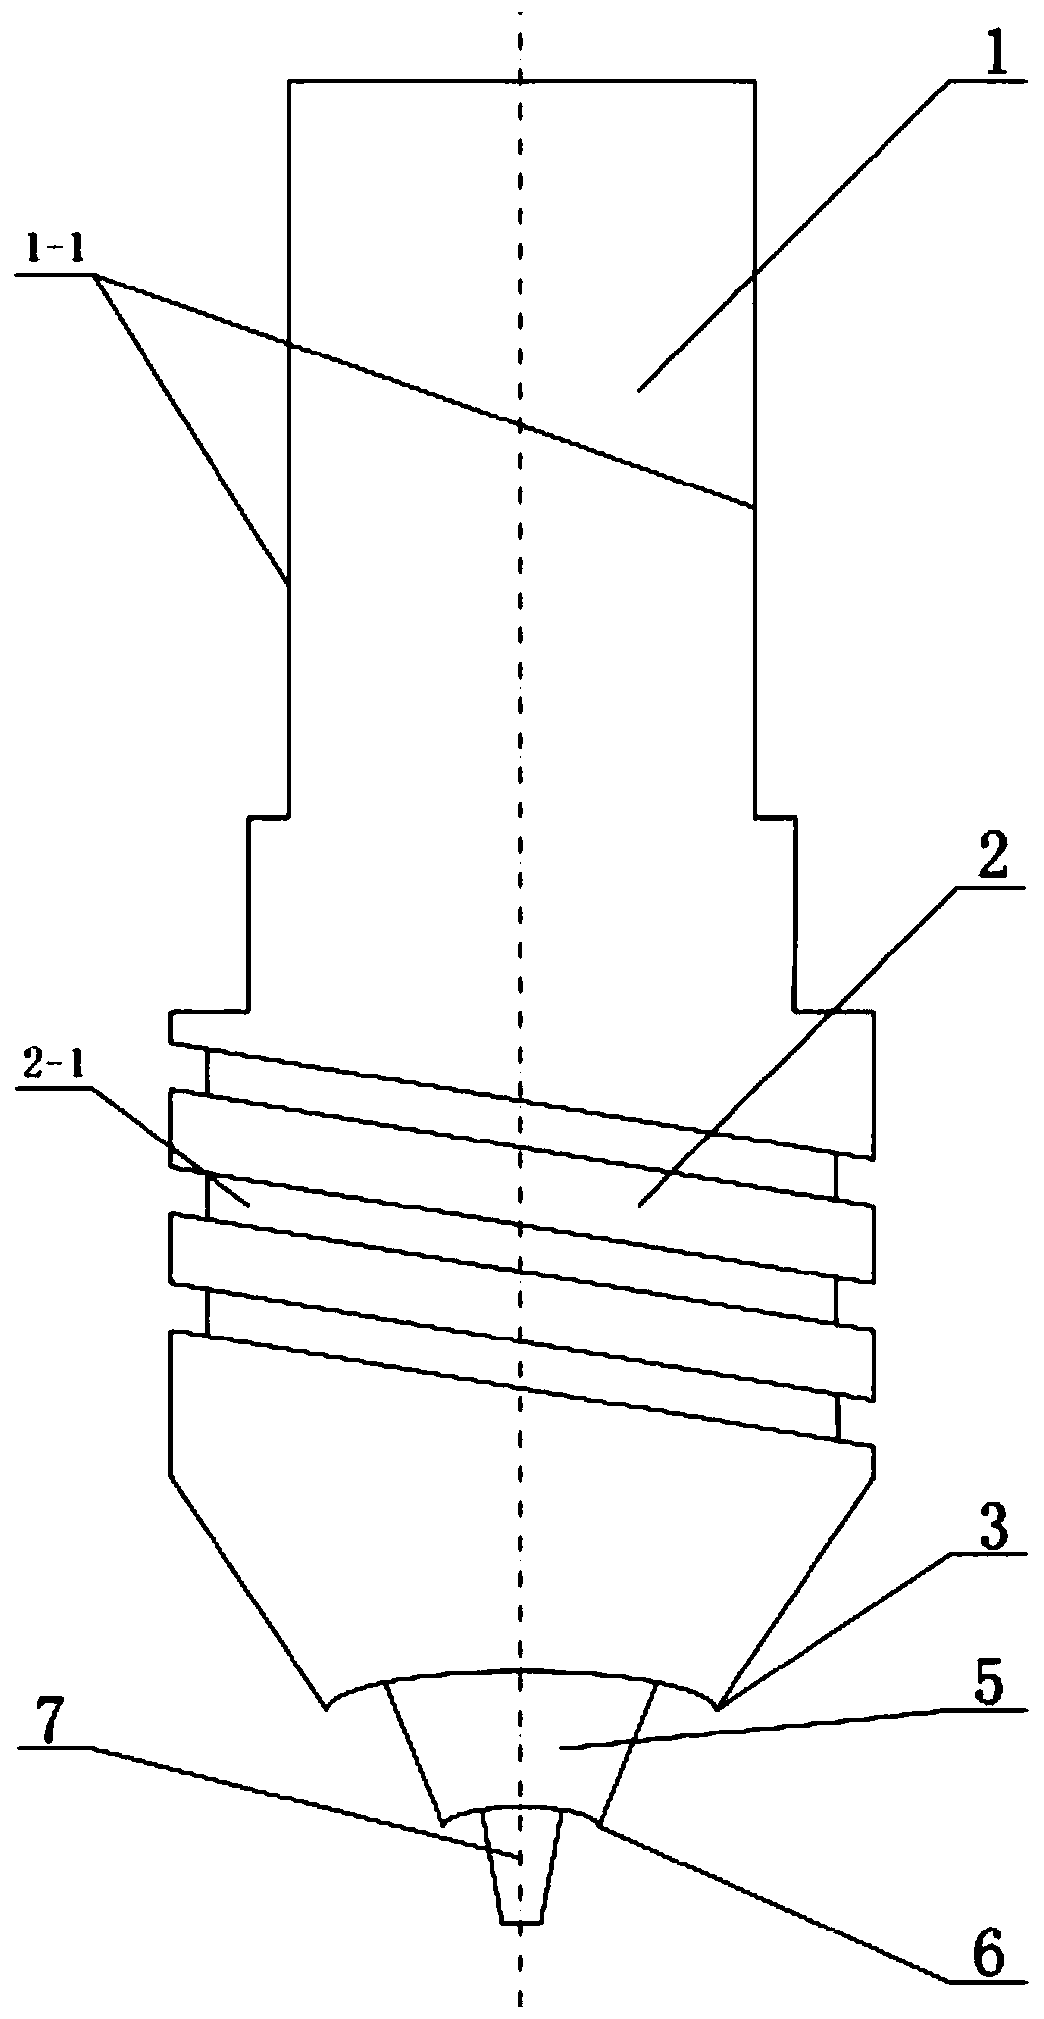 A short-section welder with variable cross-section double-needle riveting enhanced friction stir welding